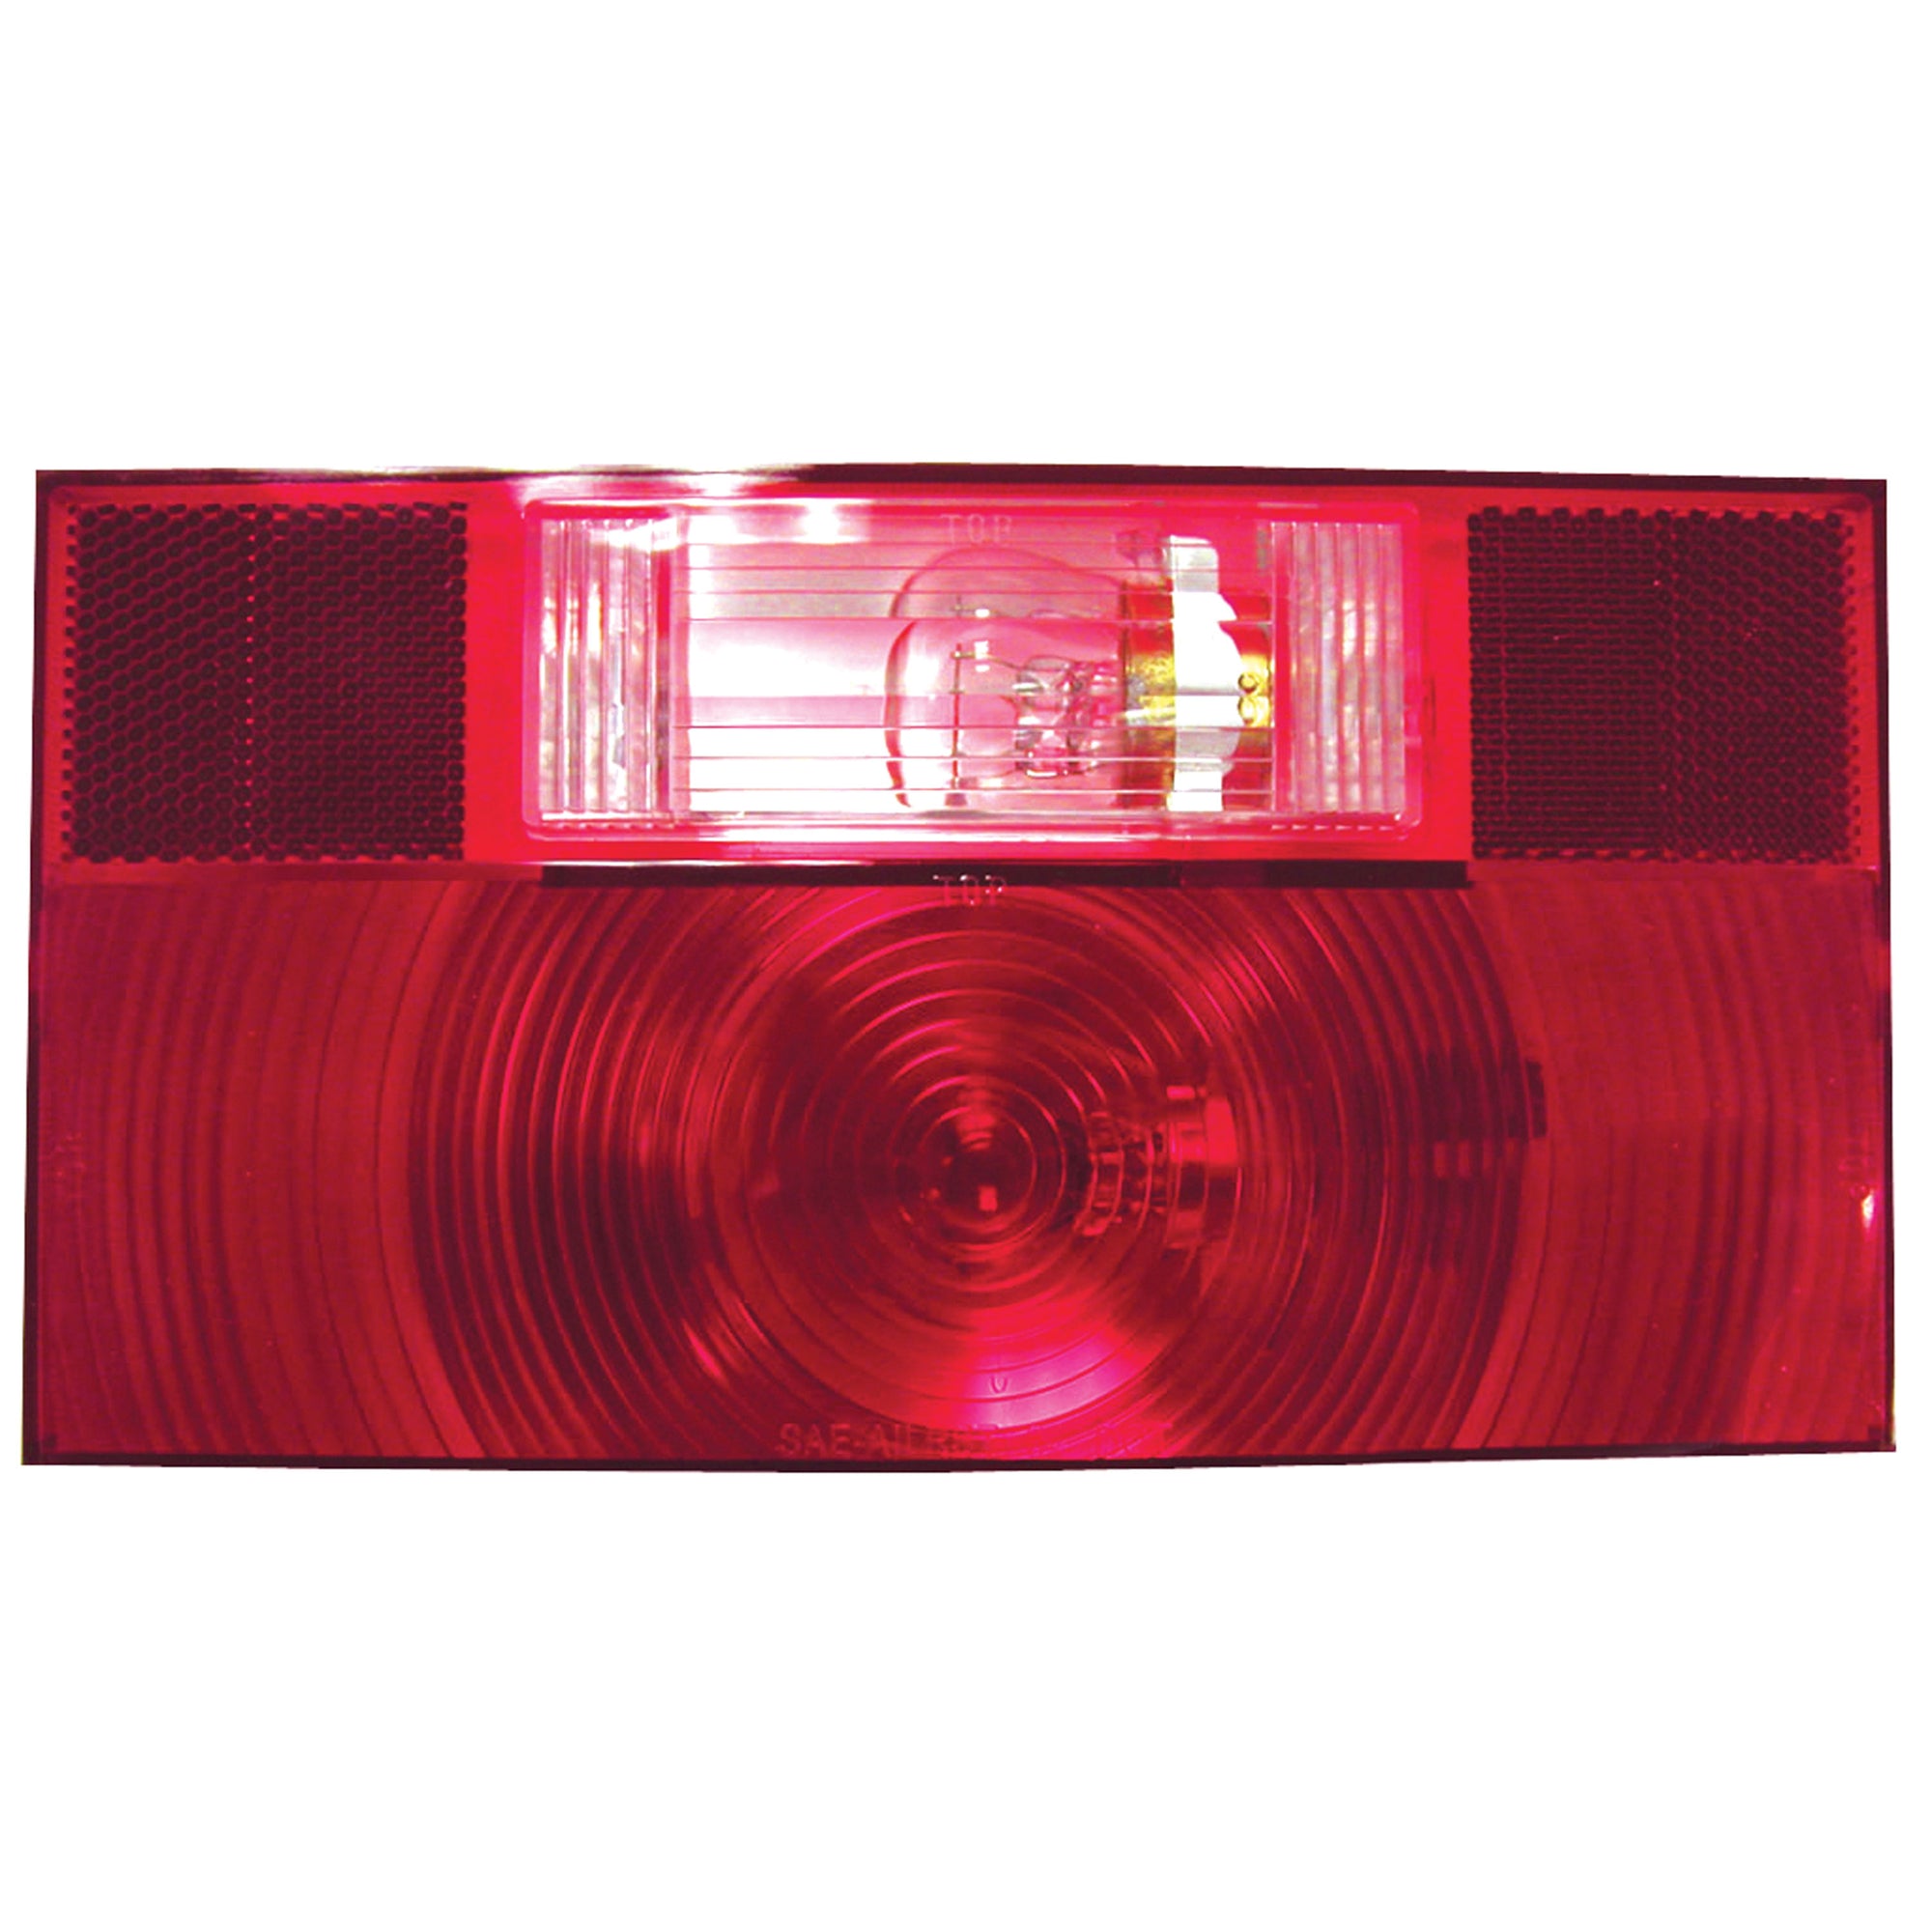 Peterson Manufacturing V25912-25 Stop, Turn, & Tail Light With Reflex - Replacement Lens For V25912